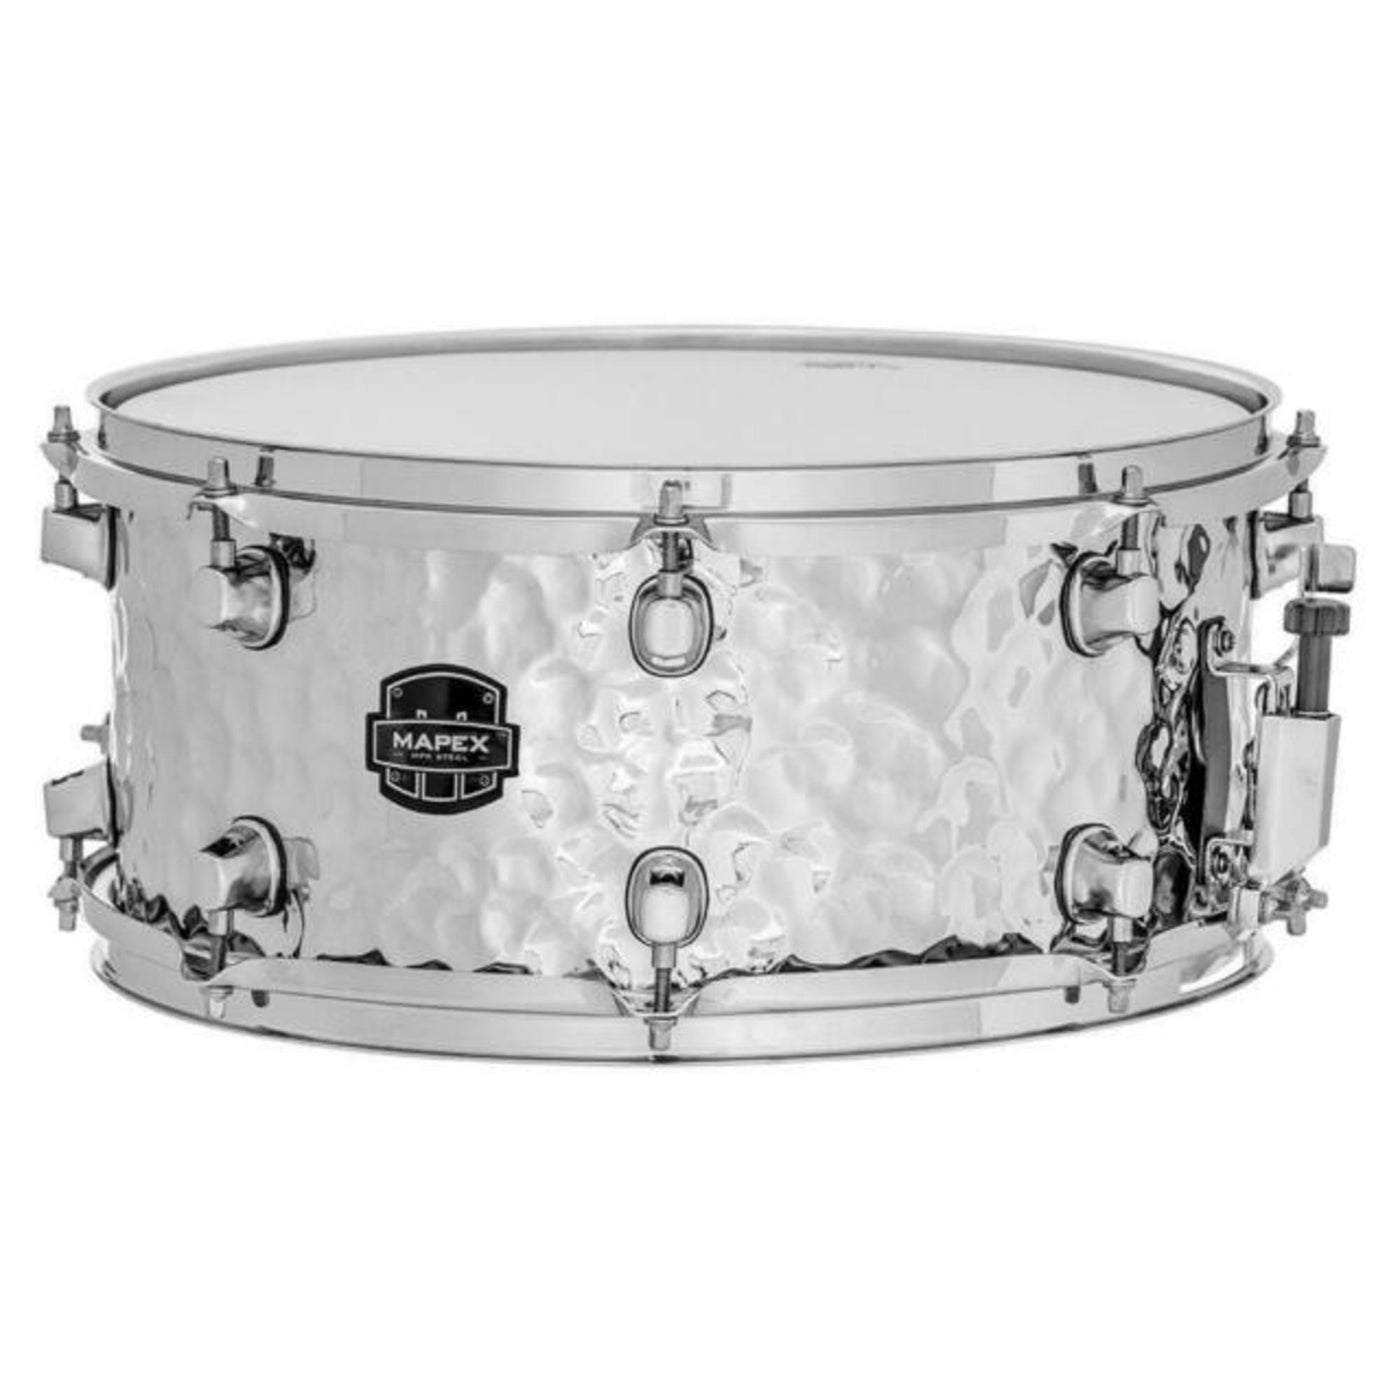 MAPEX MPST4558H MPX 14x5.5 Hammered Steel Snare Drum